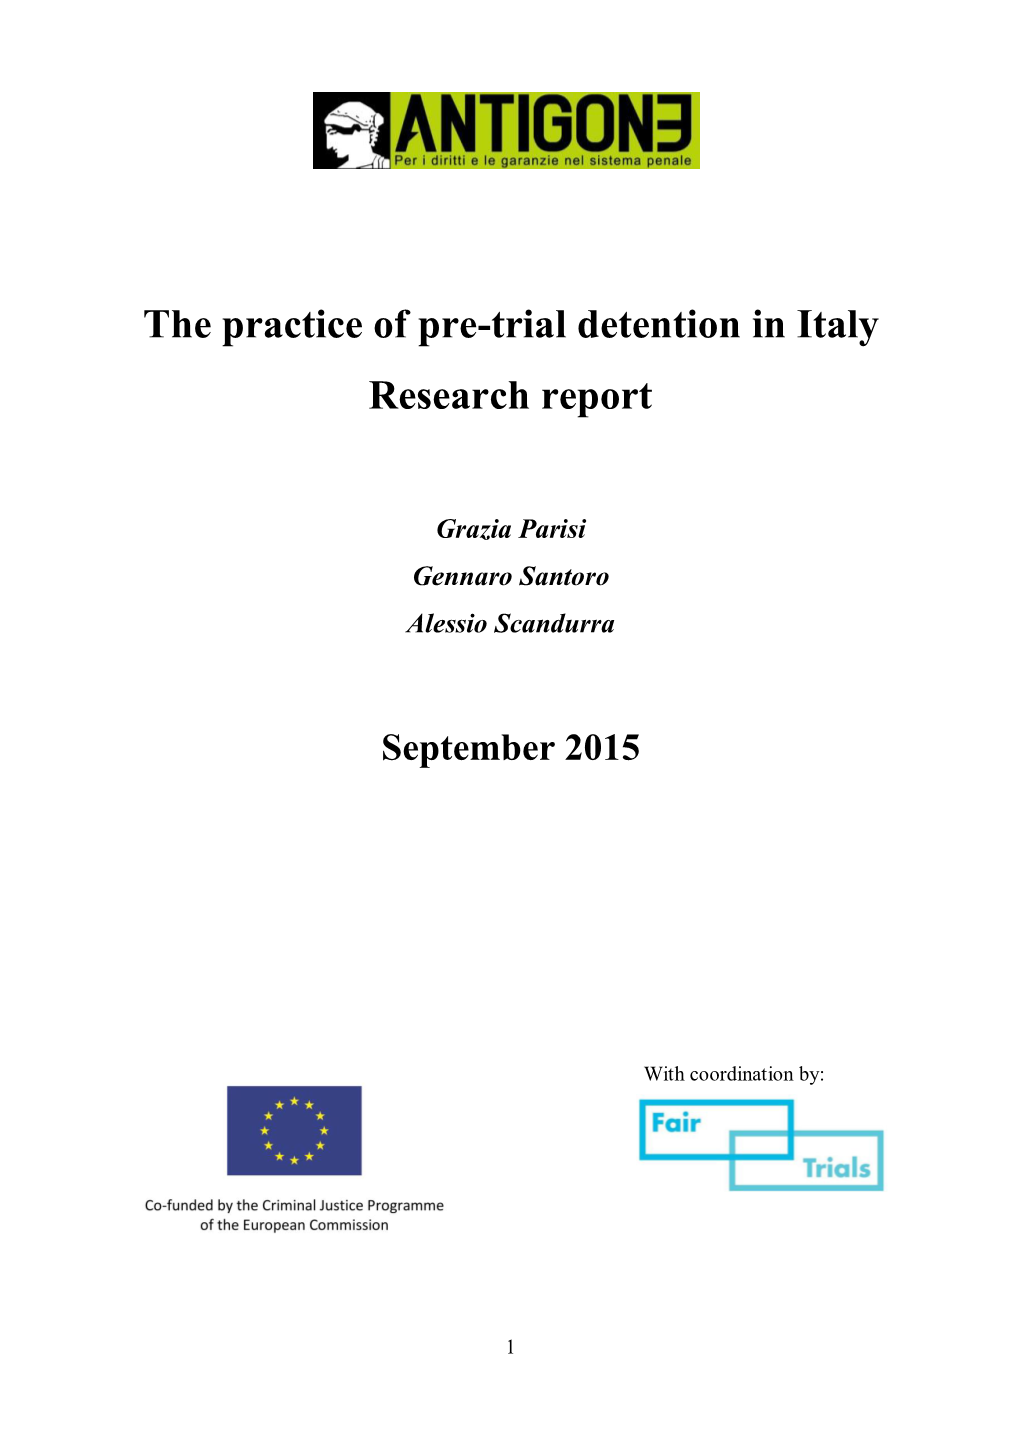 The Practice of Pre-Trial Detention in Italy Research Report